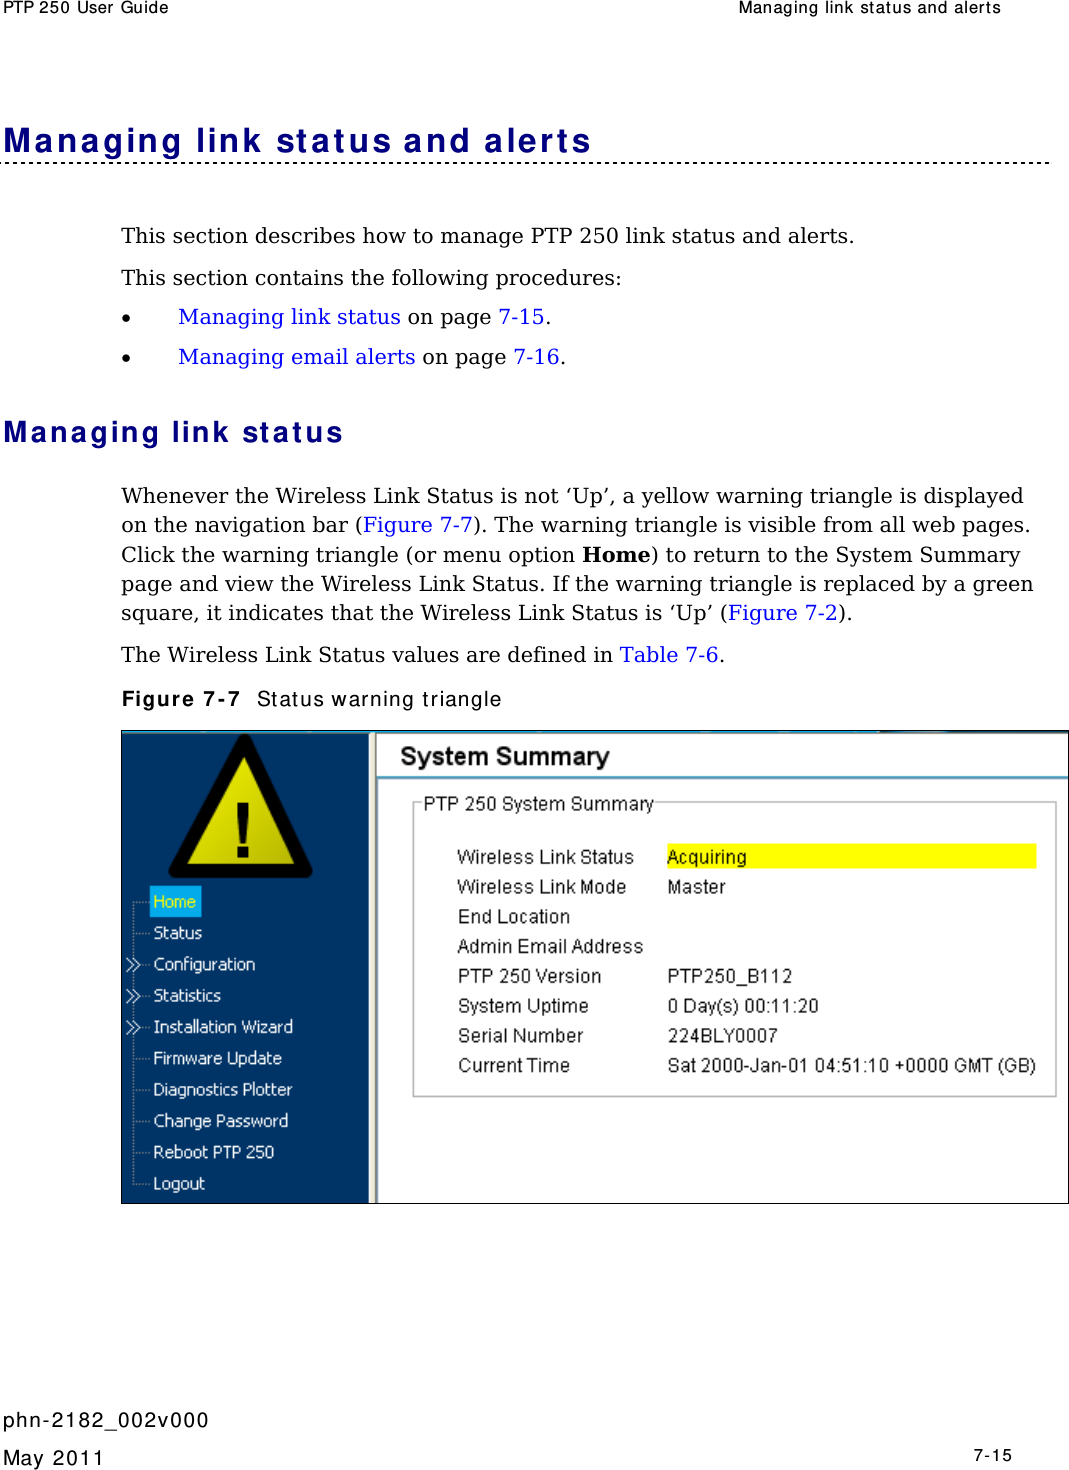 PTP 250 User Guide  Managing link st atus and aler t s   phn- 2182_002v000   May 2011   7-15  Mana ging link st at us a nd aler t s This section describes how to manage PTP 250 link status and alerts. This section contains the following procedures: • Managing link status on page 7-15. • Managing email alerts on page 7-16. Managing link sta t us Whenever the Wireless Link Status is not ‘Up’, a yellow warning triangle is displayed on the navigation bar (Figure 7-7). The warning triangle is visible from all web pages. Click the warning triangle (or menu option Home) to return to the System Summary page and view the Wireless Link Status. If the warning triangle is replaced by a green square, it indicates that the Wireless Link Status is ‘Up’ (Figure 7-2). The Wireless Link Status values are defined in Table 7-6. Figure  7 - 7   St atus warning t riangle  